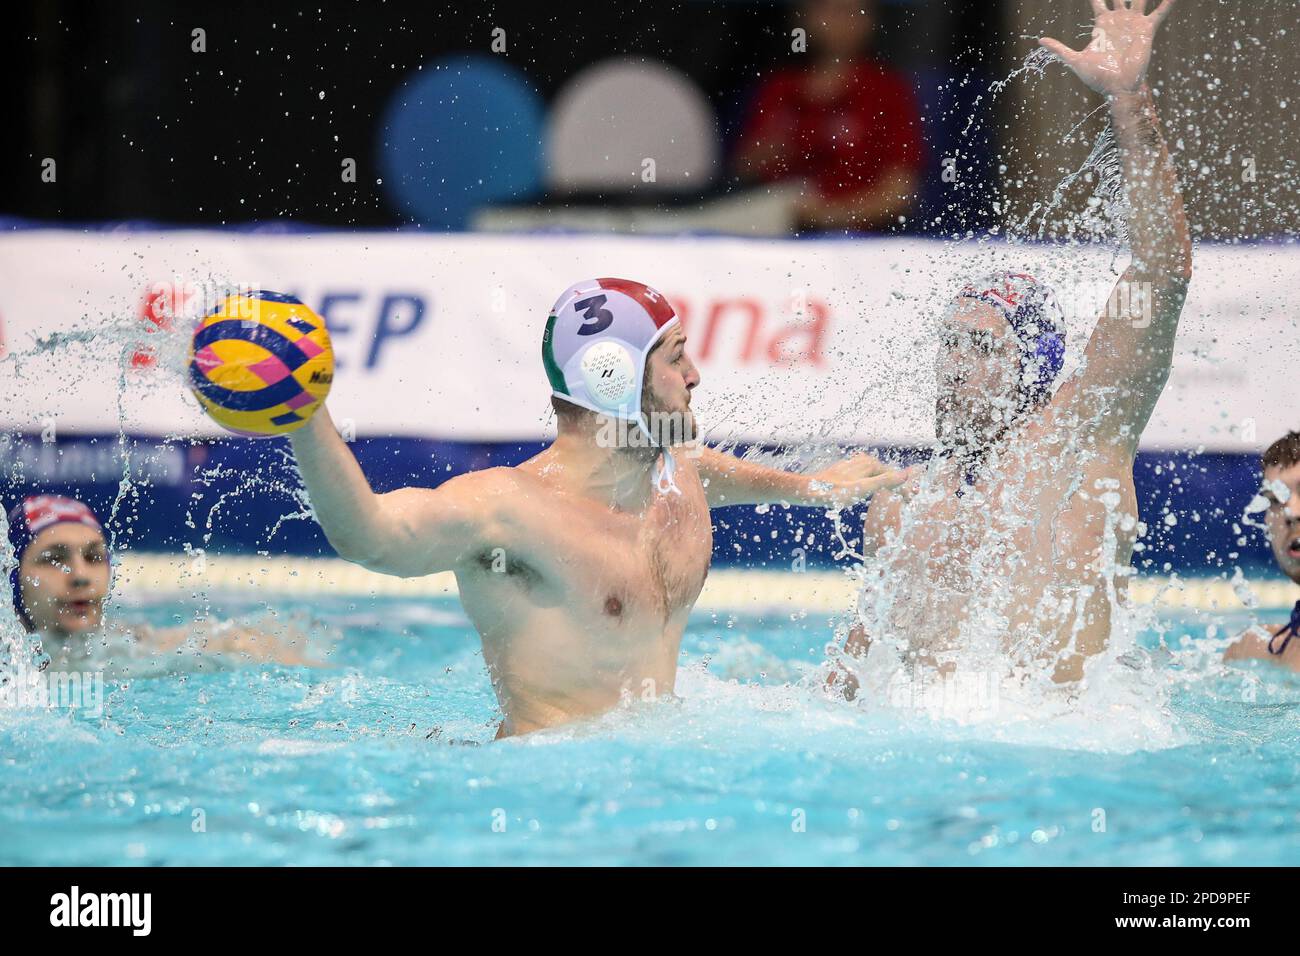 ZAGREB, CROATIA - MARCH 14: Krisztian Manhercz of Hungary in action against Ivan Krapic of Croatia during the Men's Water Polo World Cup match between Hungary and Croatia on March 14, 2023 at Mladost Sports Park Pool in Zagreb, Croatia. Photo: Matija Habljak/PIXSELL Stock Photo